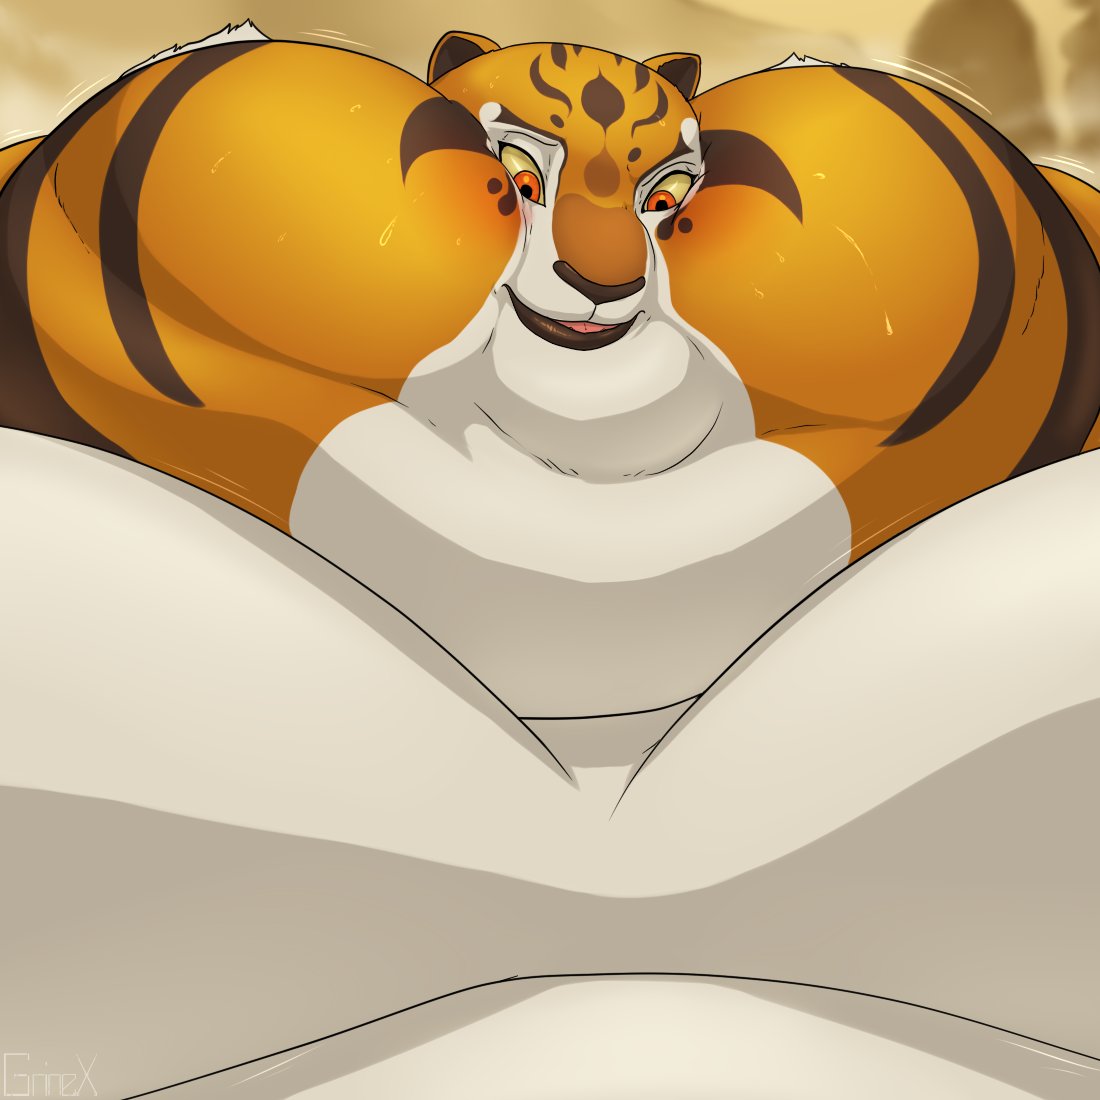 inkathon bust commission for @TheAddylad of Tigress from kung fu panda gett...